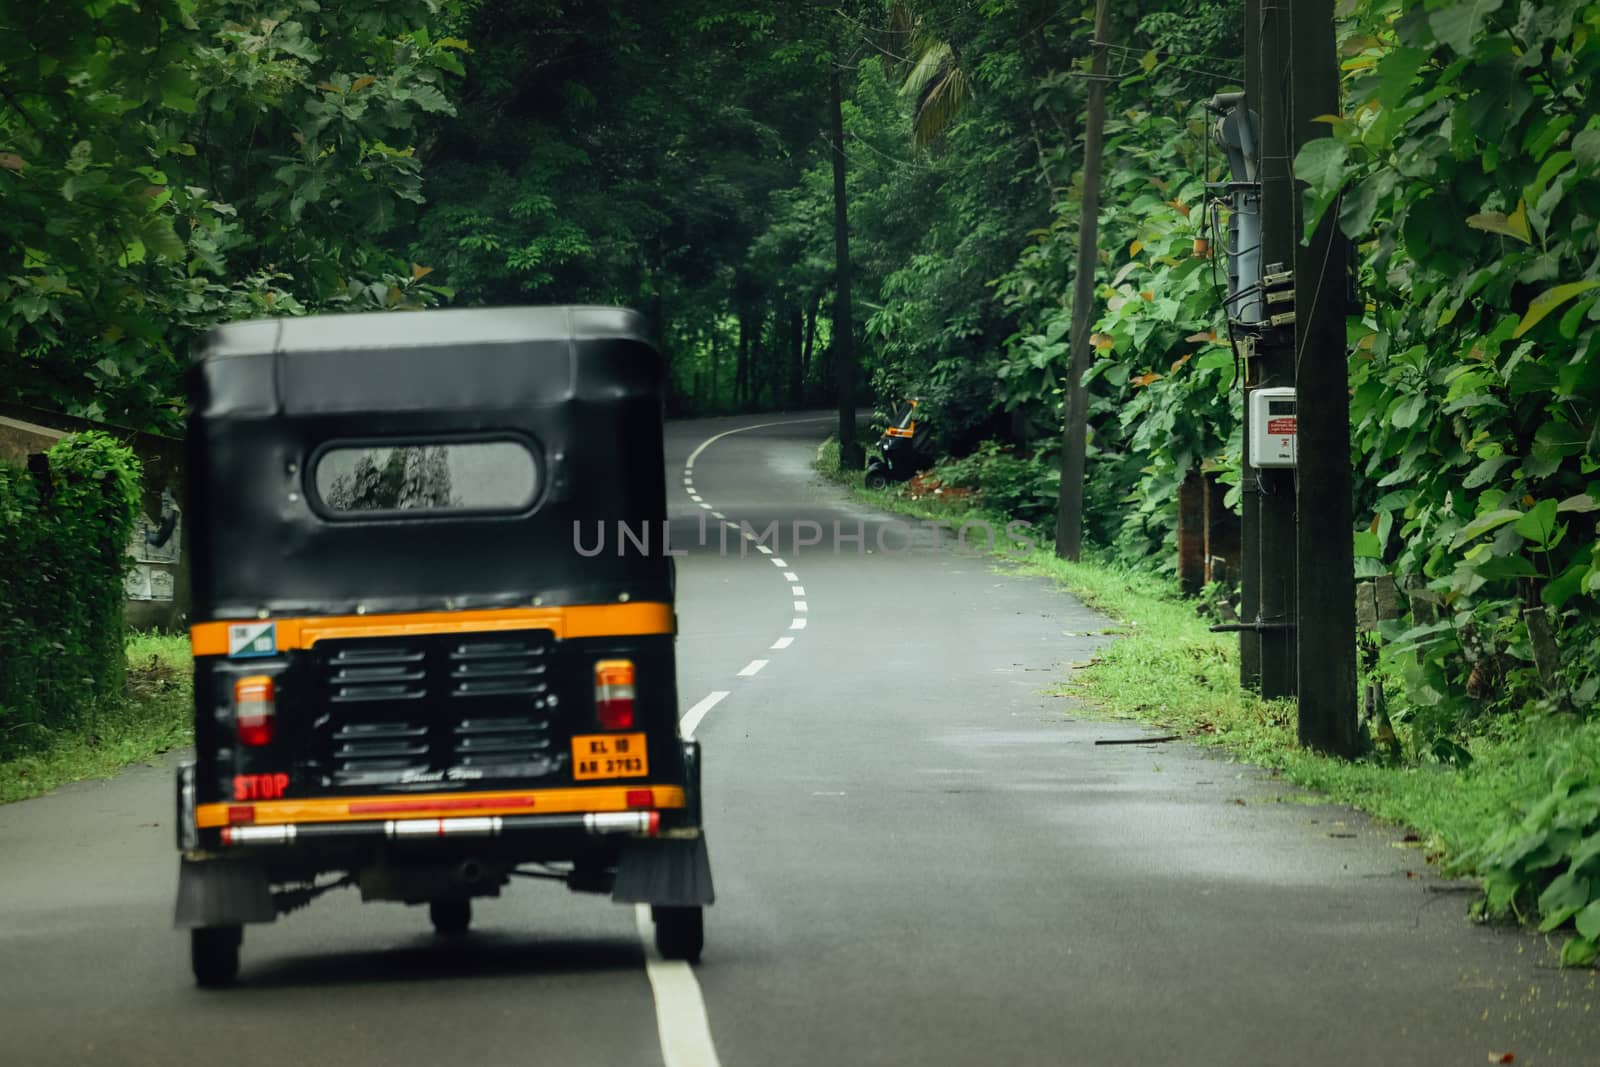 A black three wheeler running towards the forest in the road